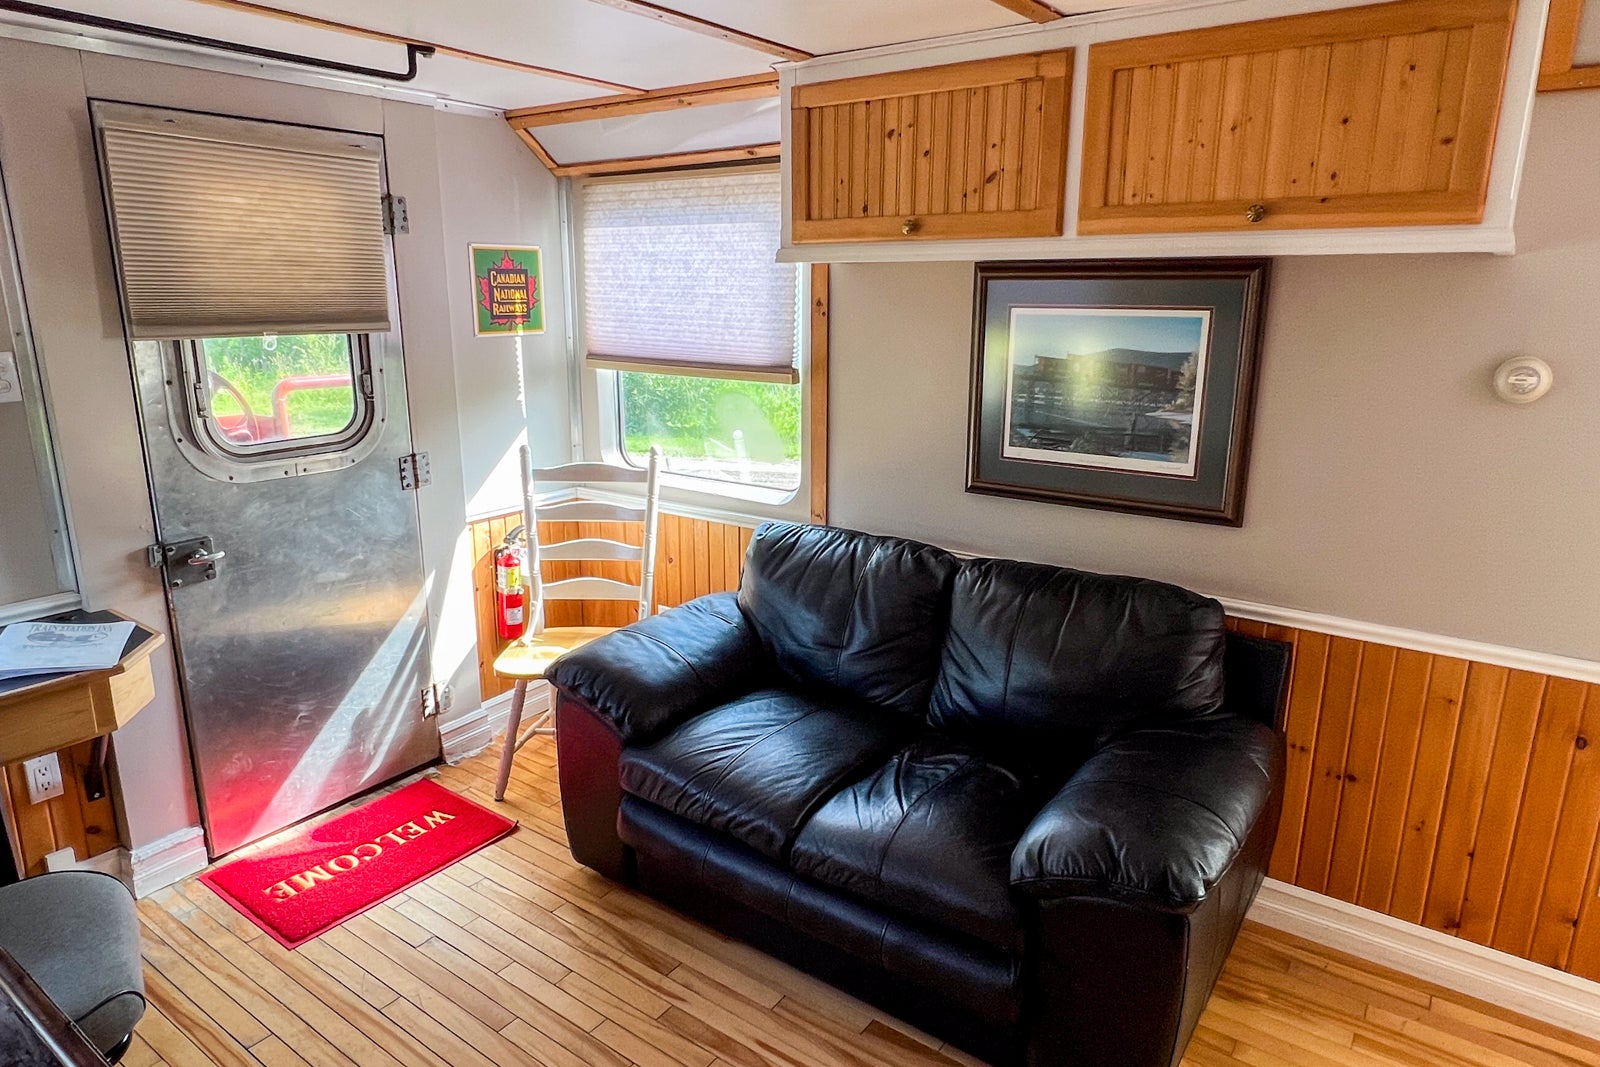 The sitting area of Caboose #8 at the Train Station Inn in Tatamagouche, Nova Scotia